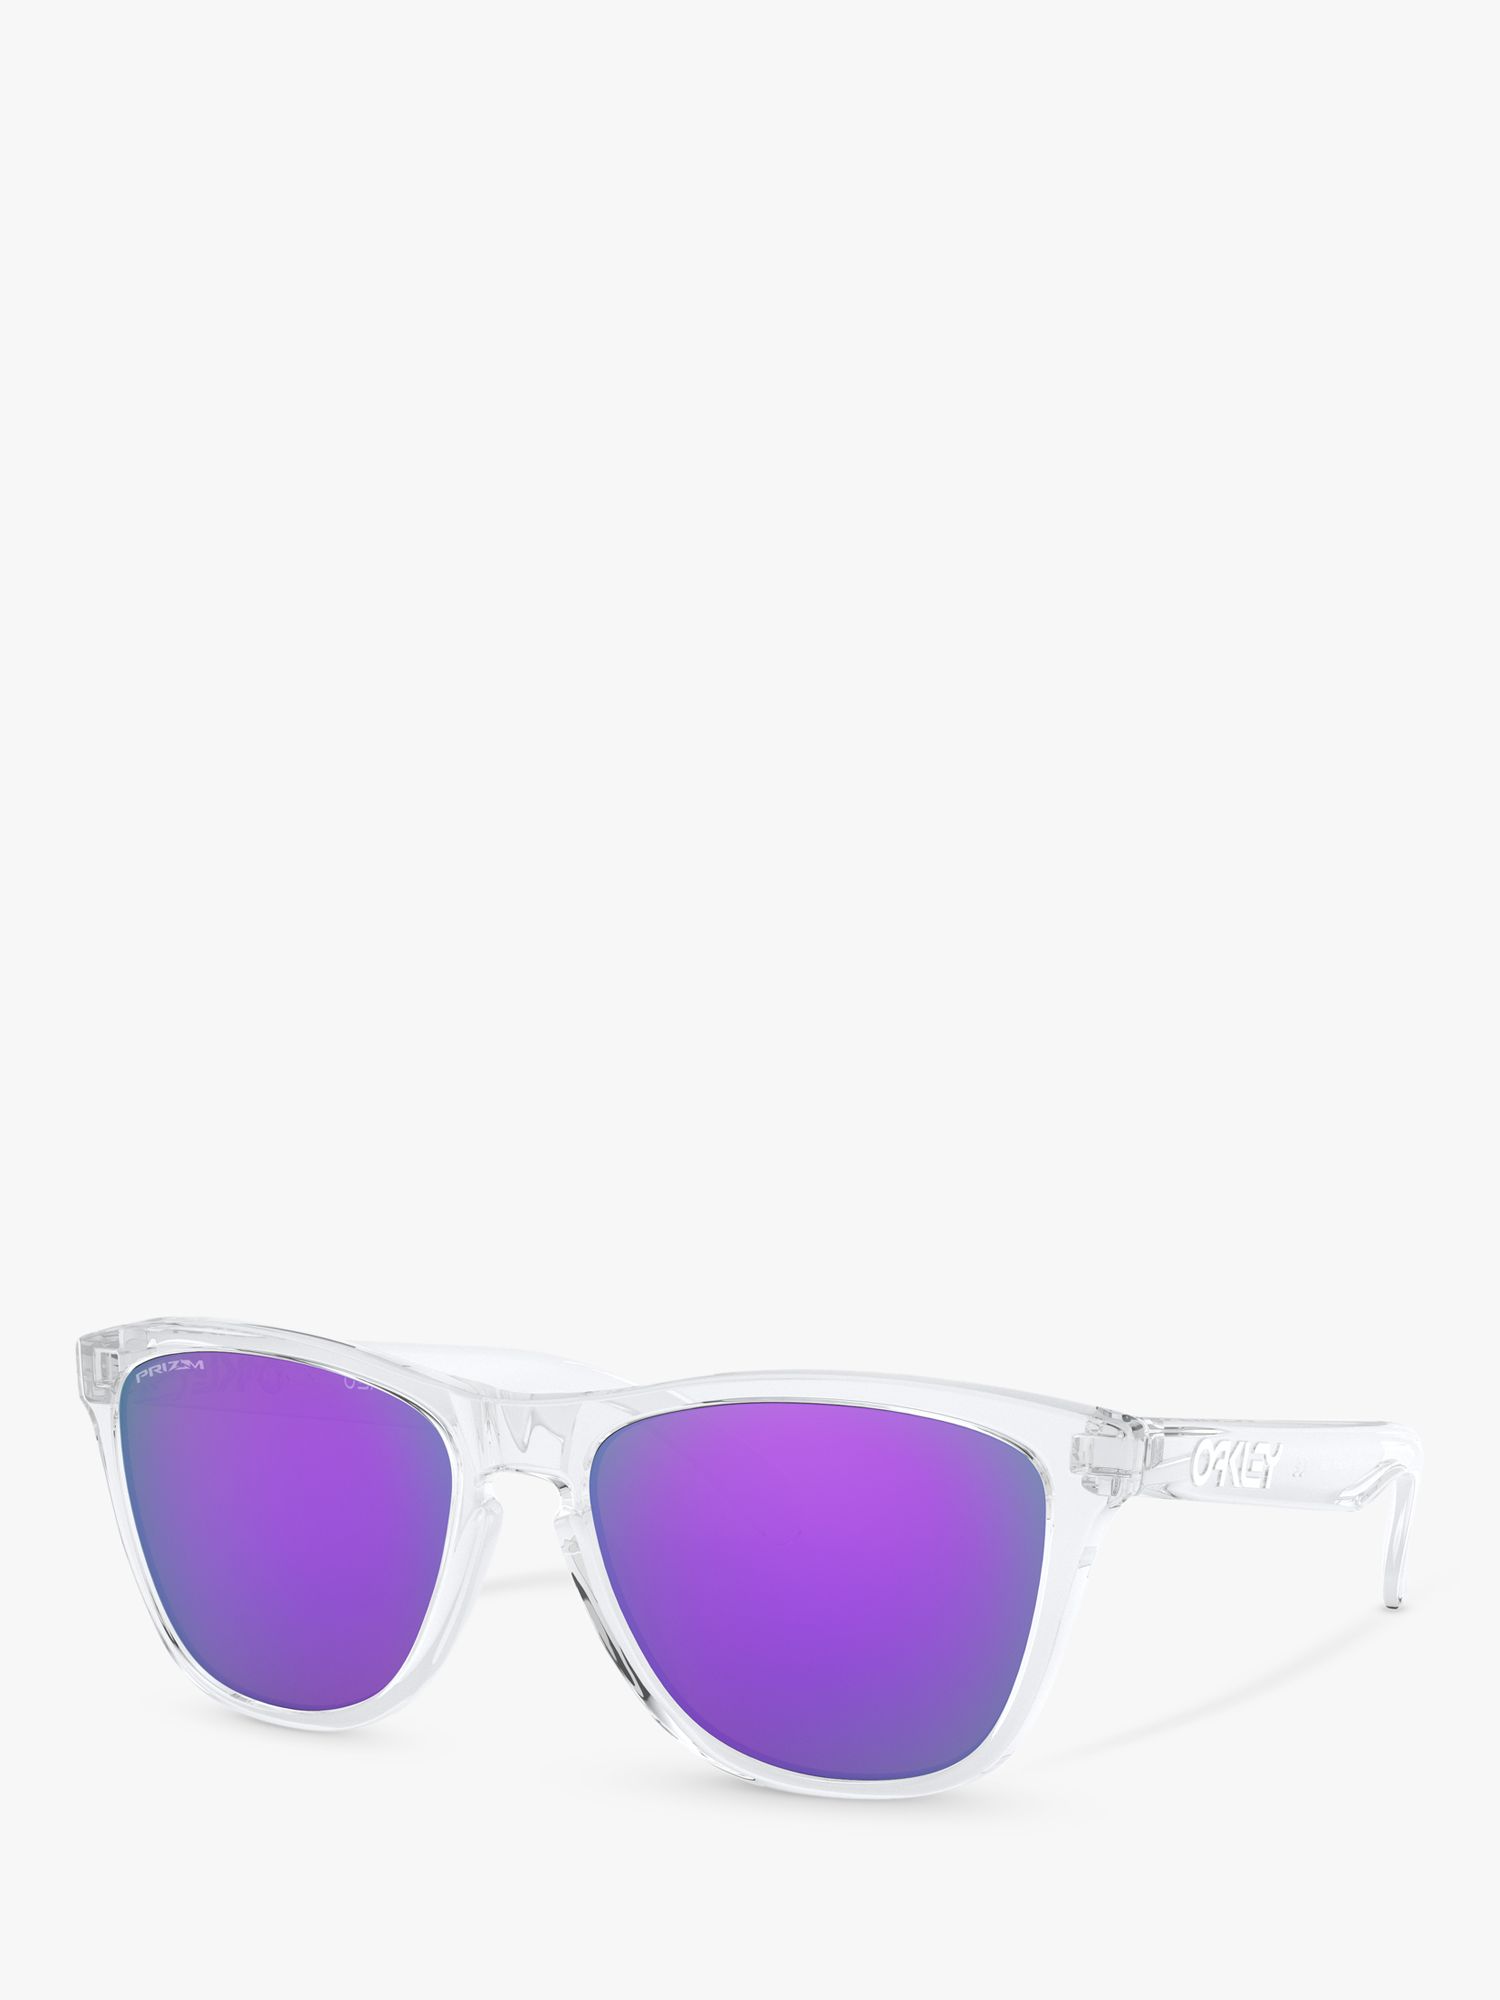 Oakley OO9013 Men's Frogskins Prizm Square Sunglasses, Clear/Mirror Purple  at John Lewis & Partners